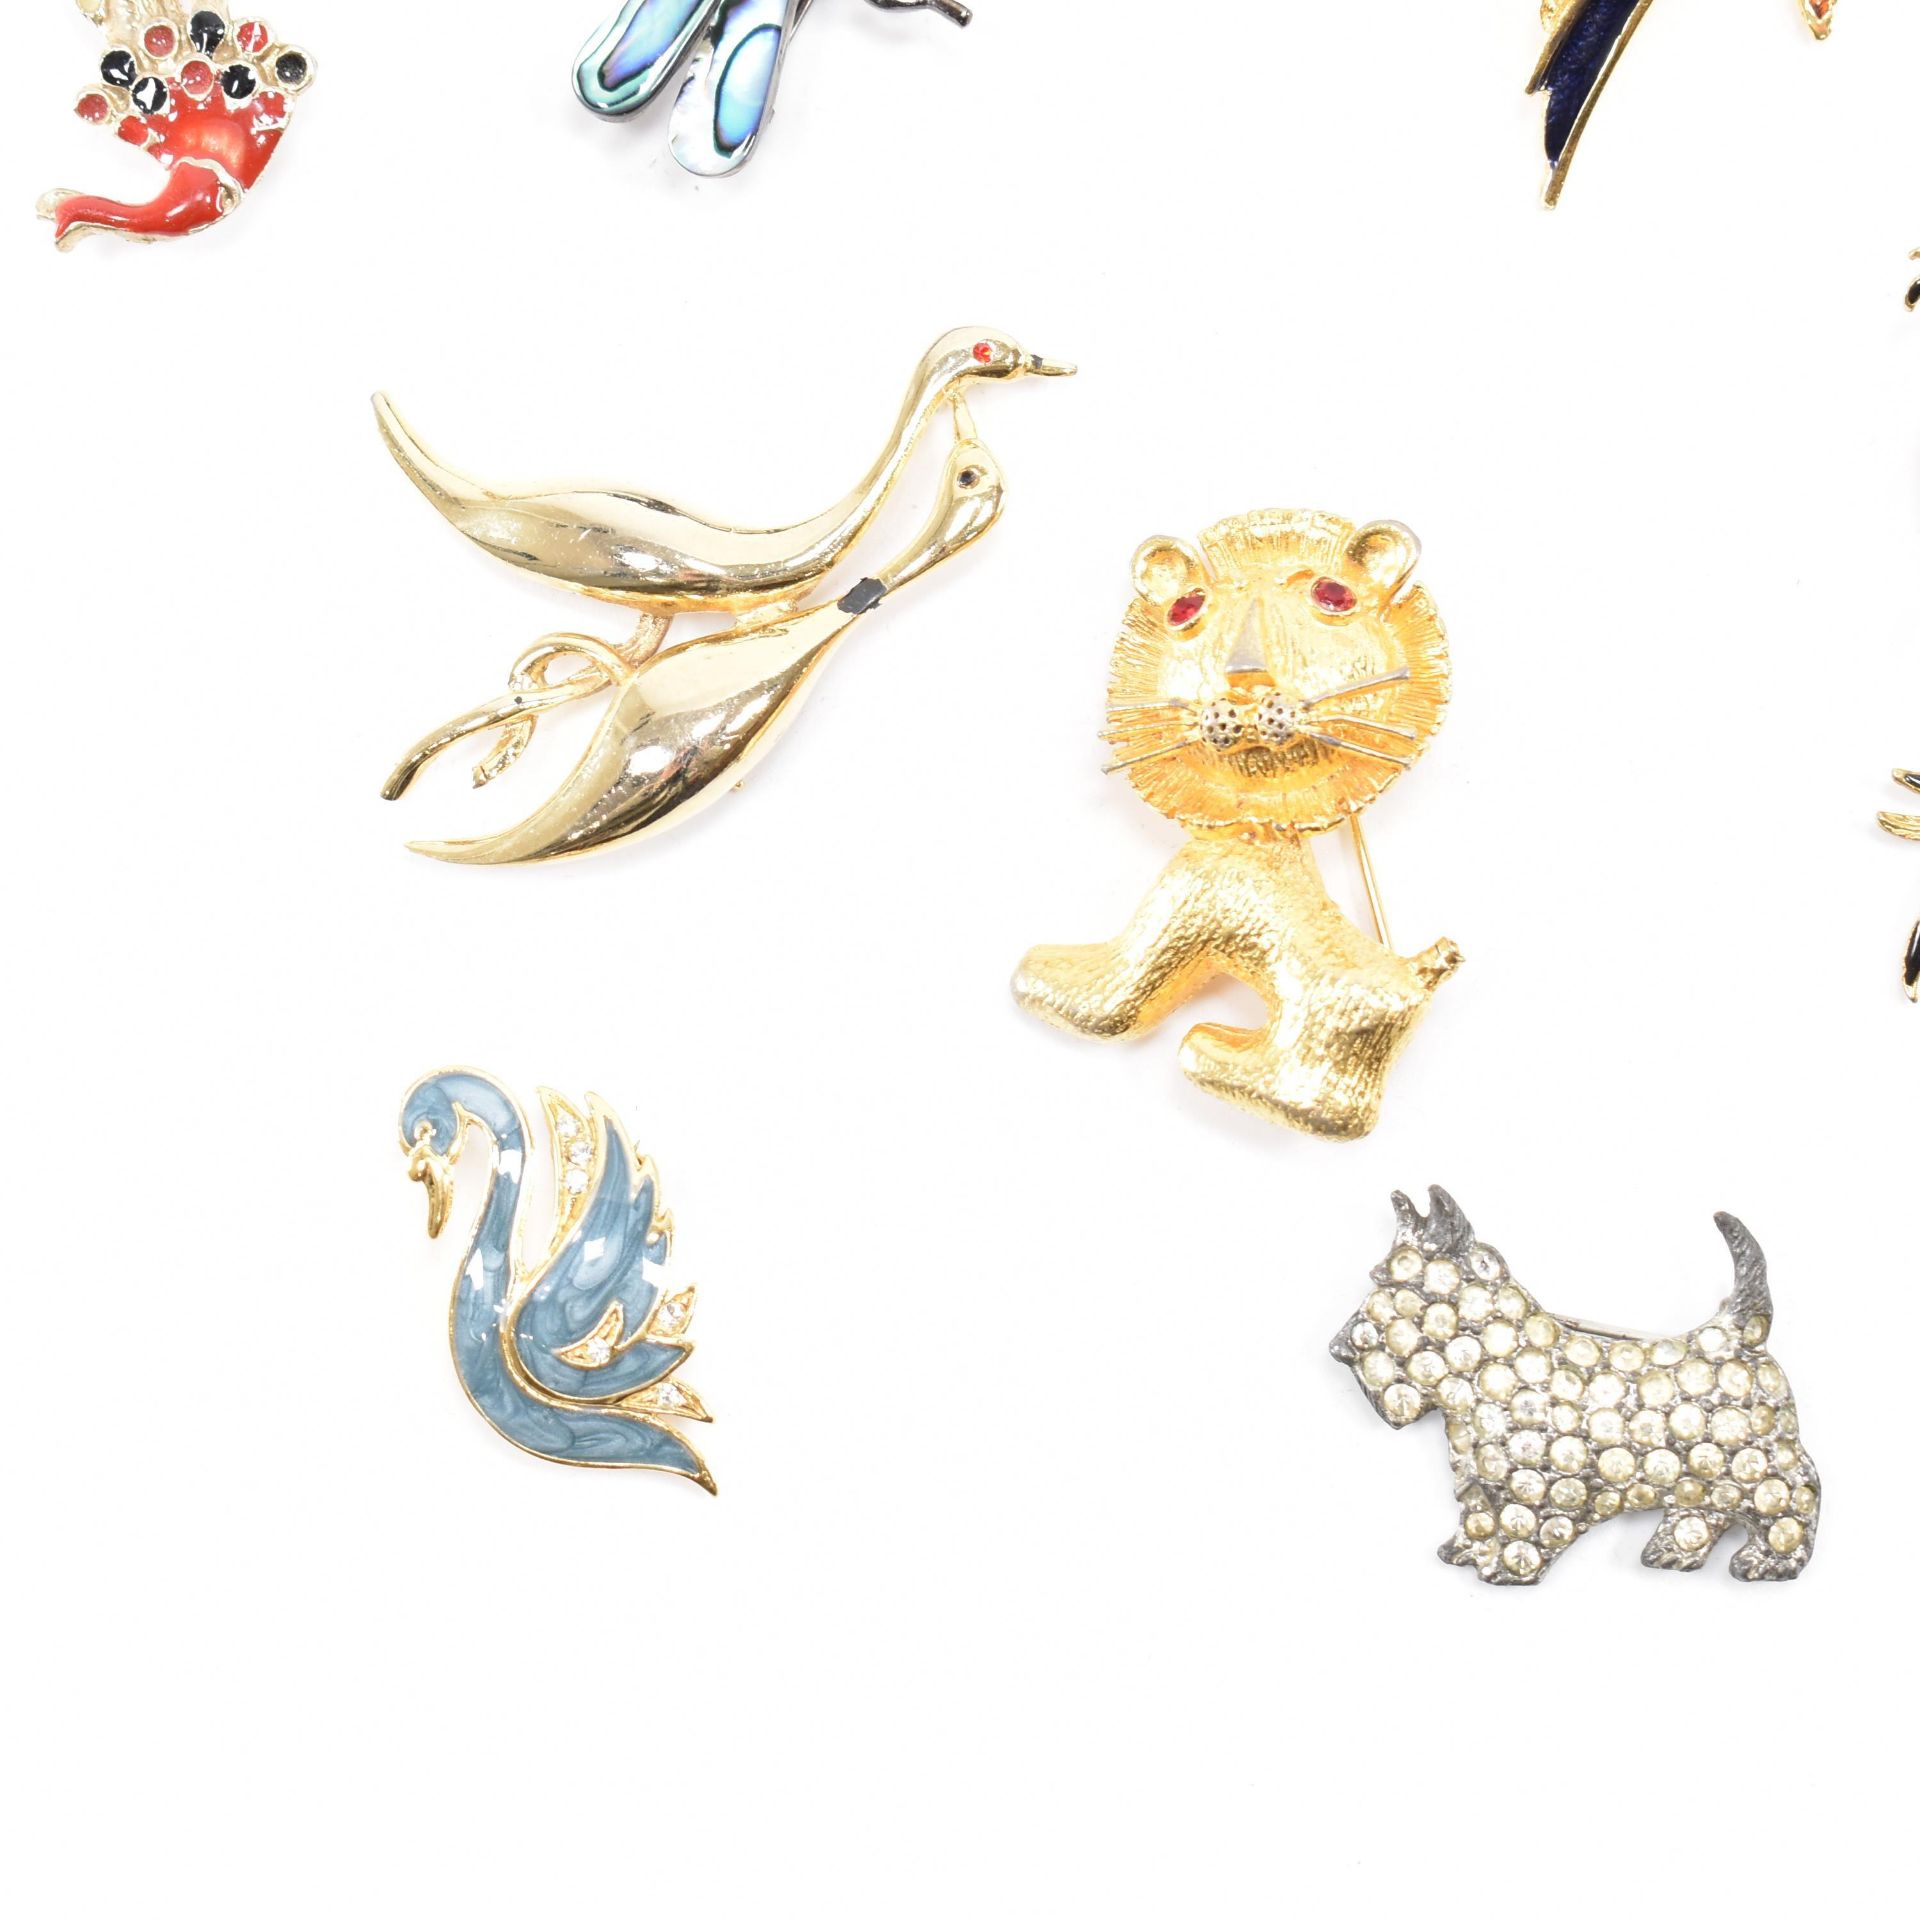 ASSORTMENT OF VINTAGE ANIMAL BROOCHES - Image 4 of 5